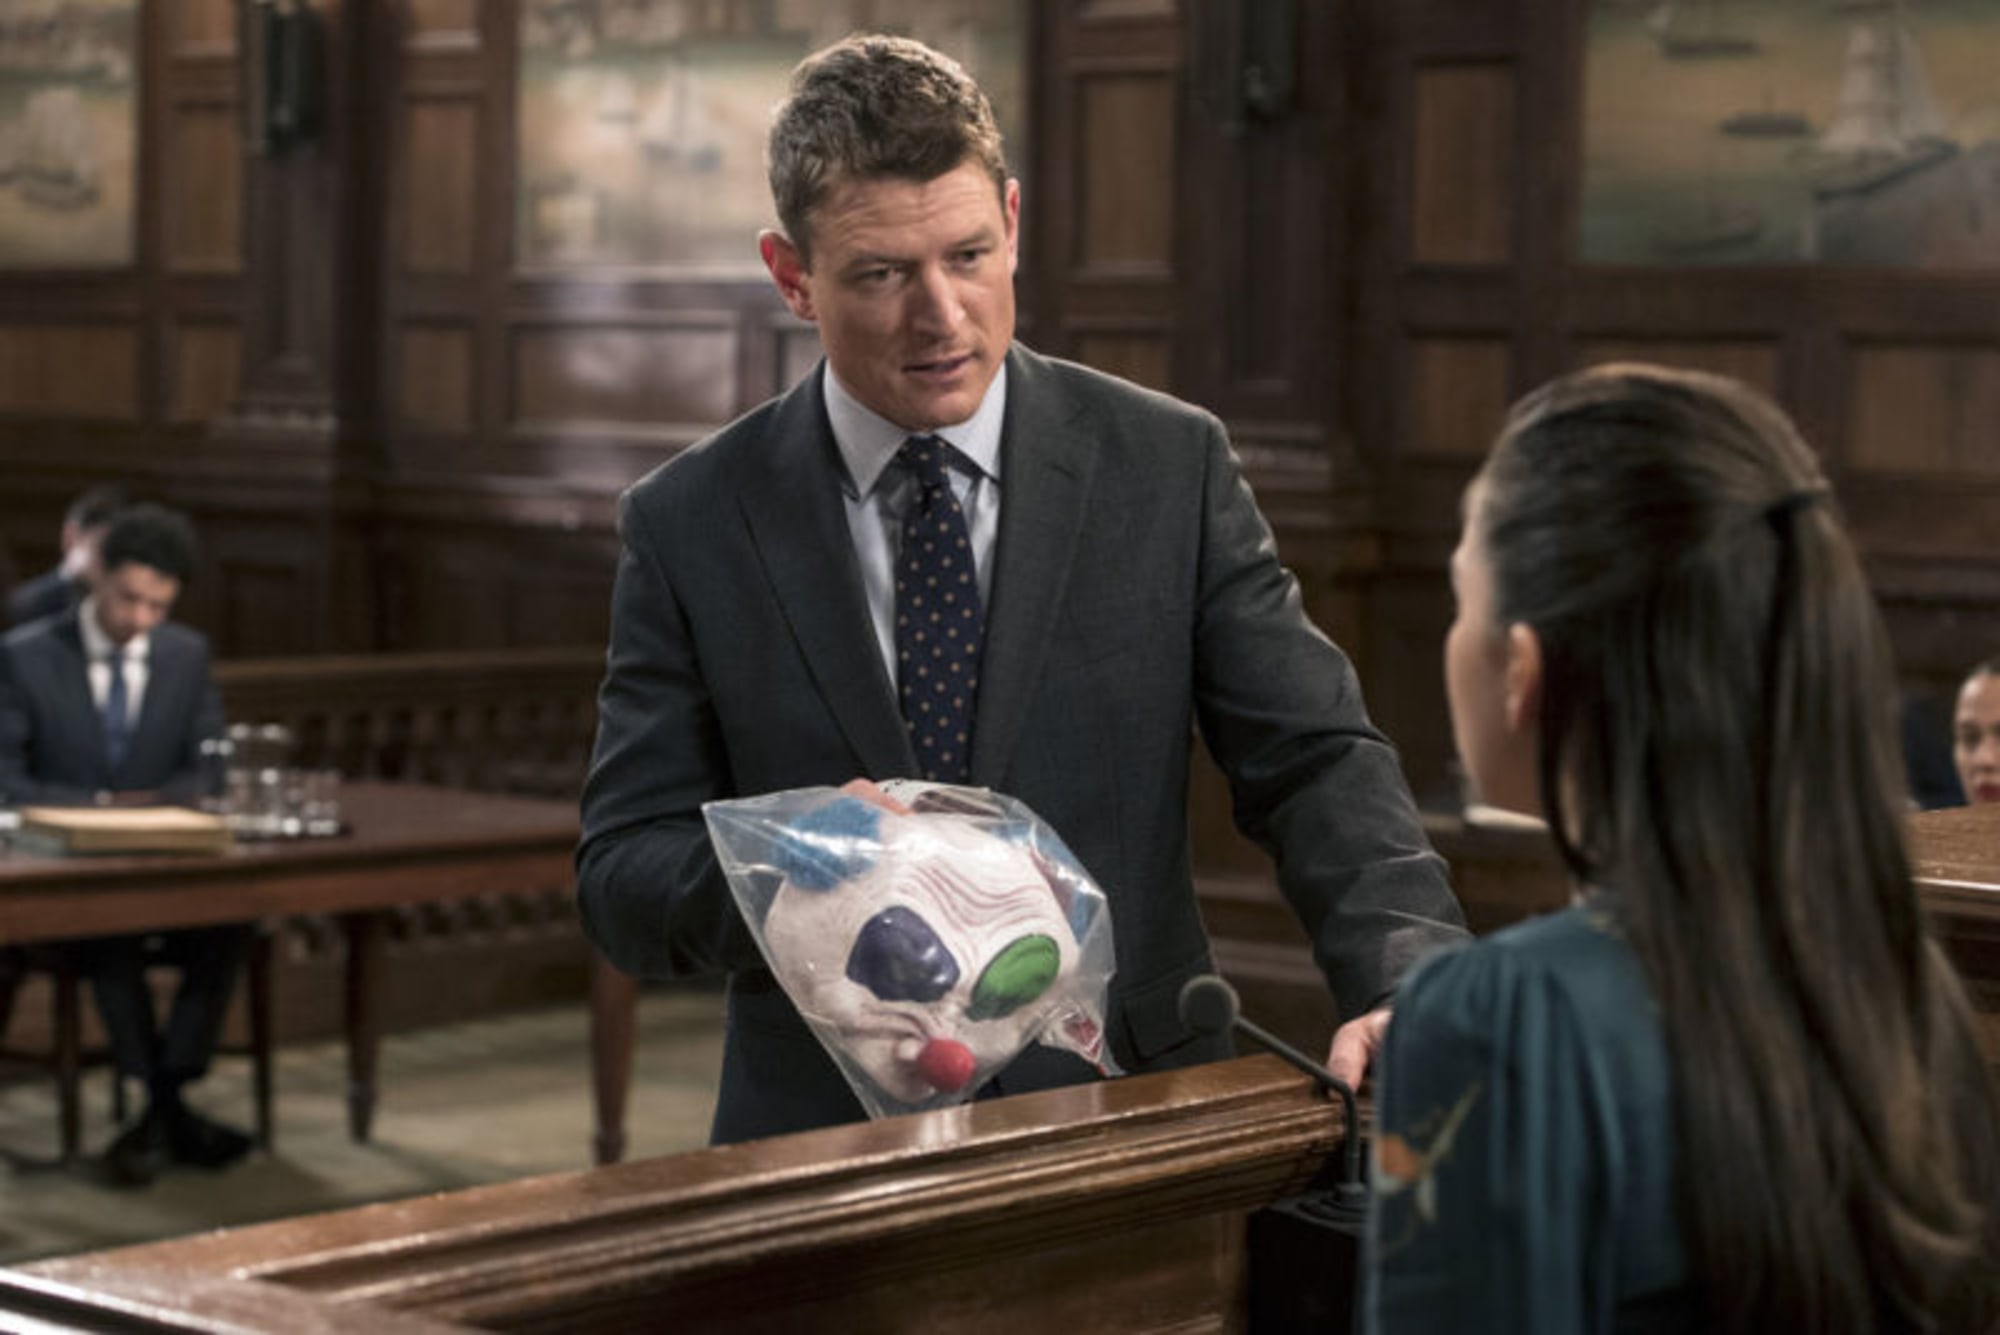 Law And Order Svu Season 19 Episode 17 Preview Send In The Clowns